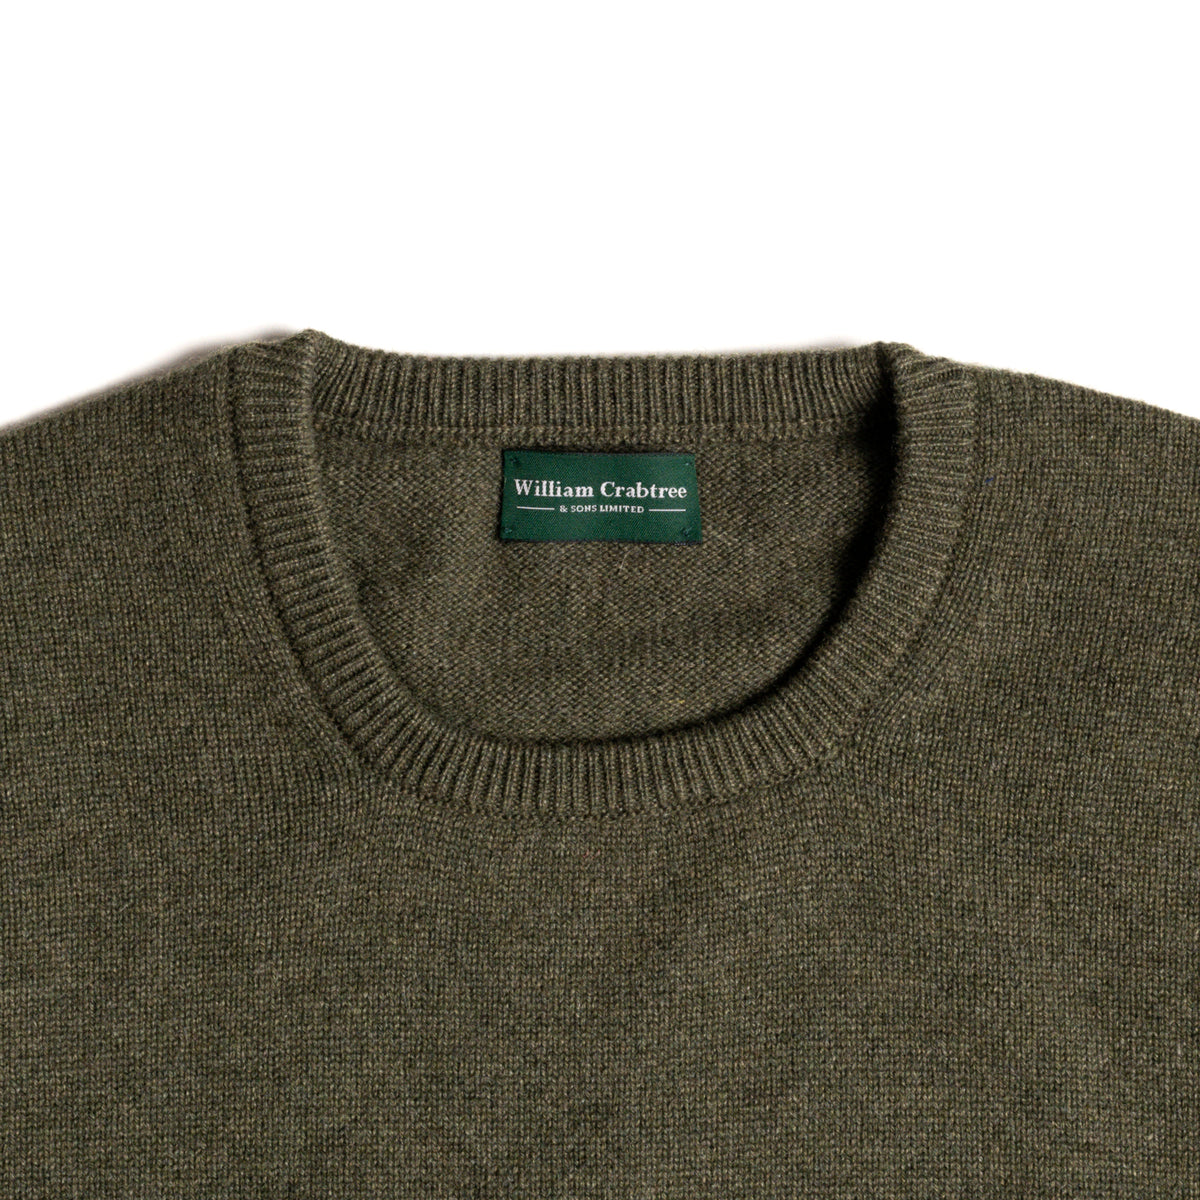 Loden Mix 2 Ply Cashmere Crew Neck